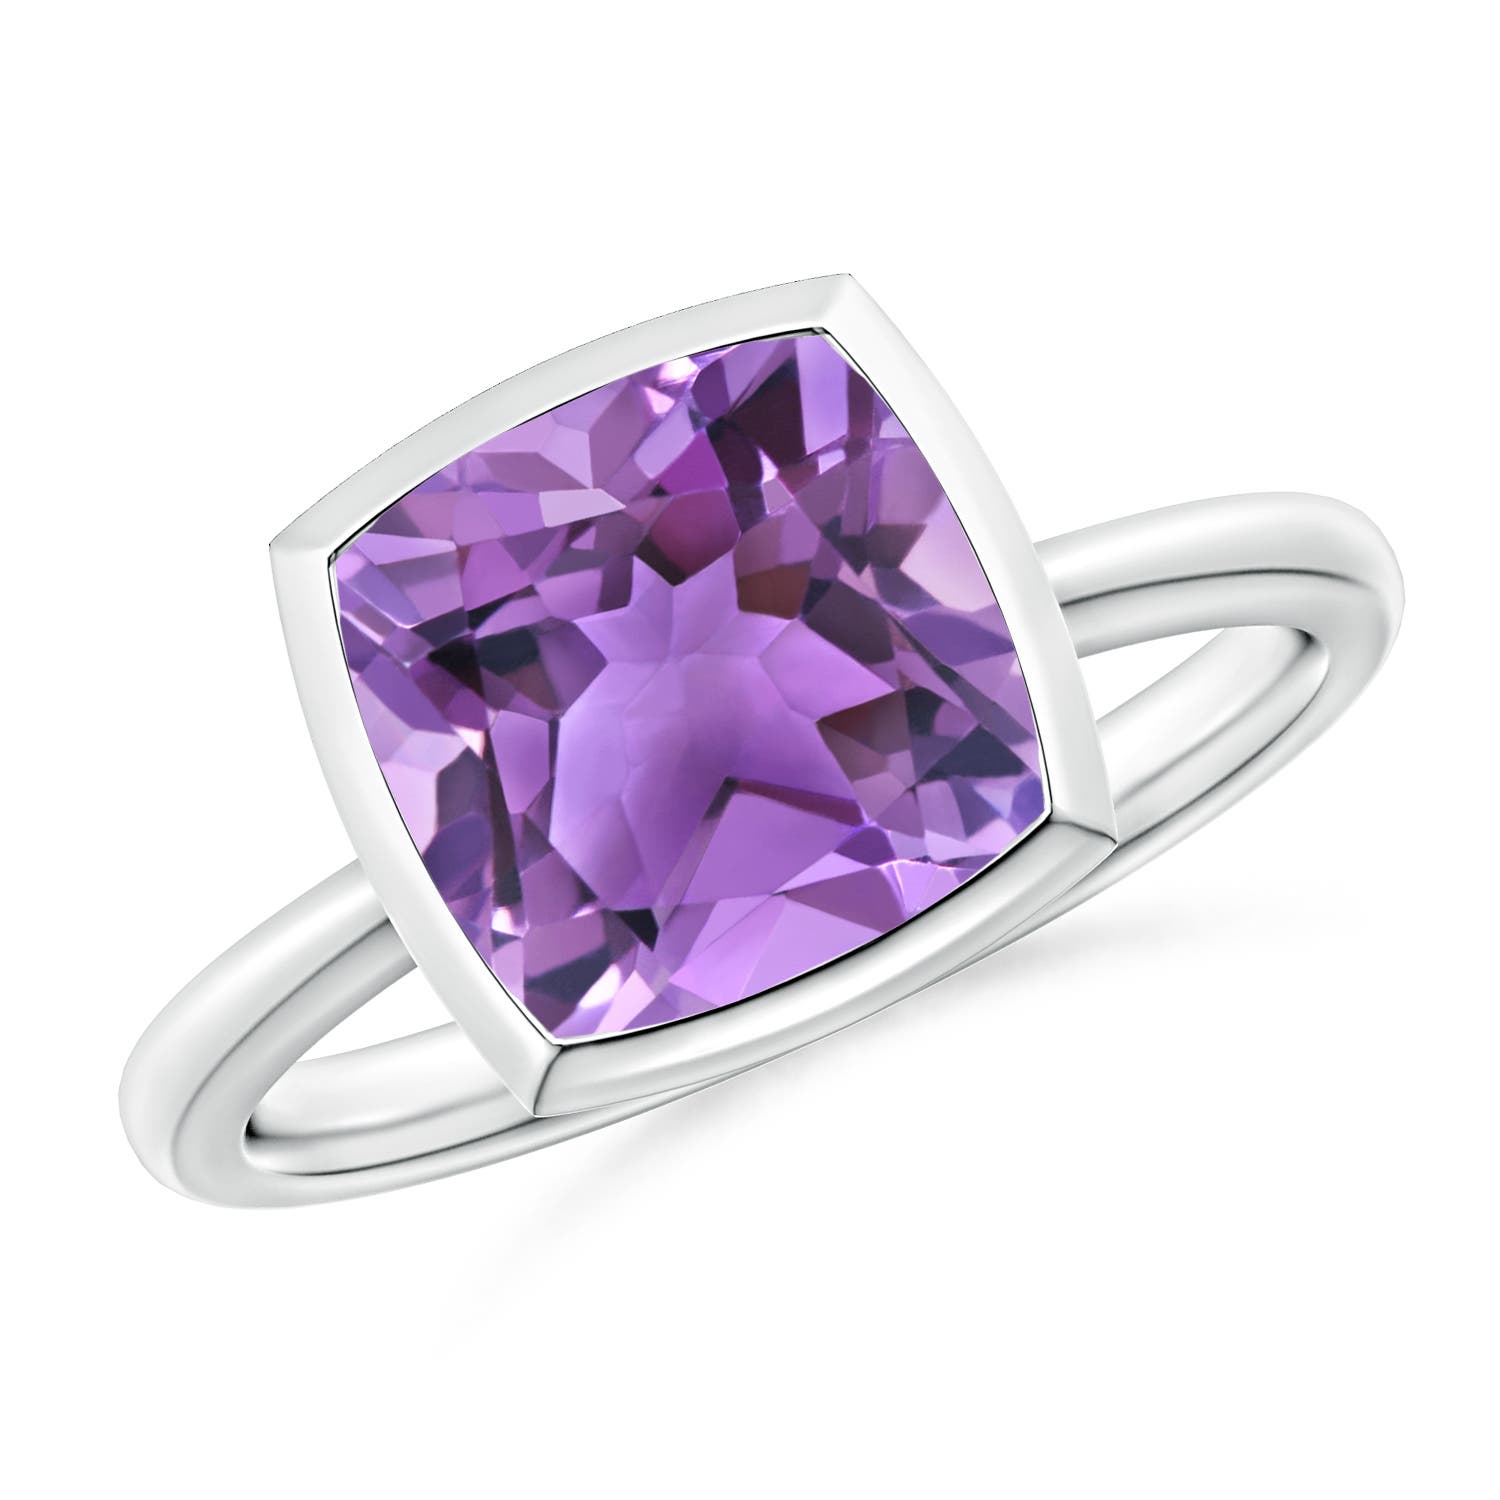 AA - Amethyst / 3.1 CT / 14 KT White Gold